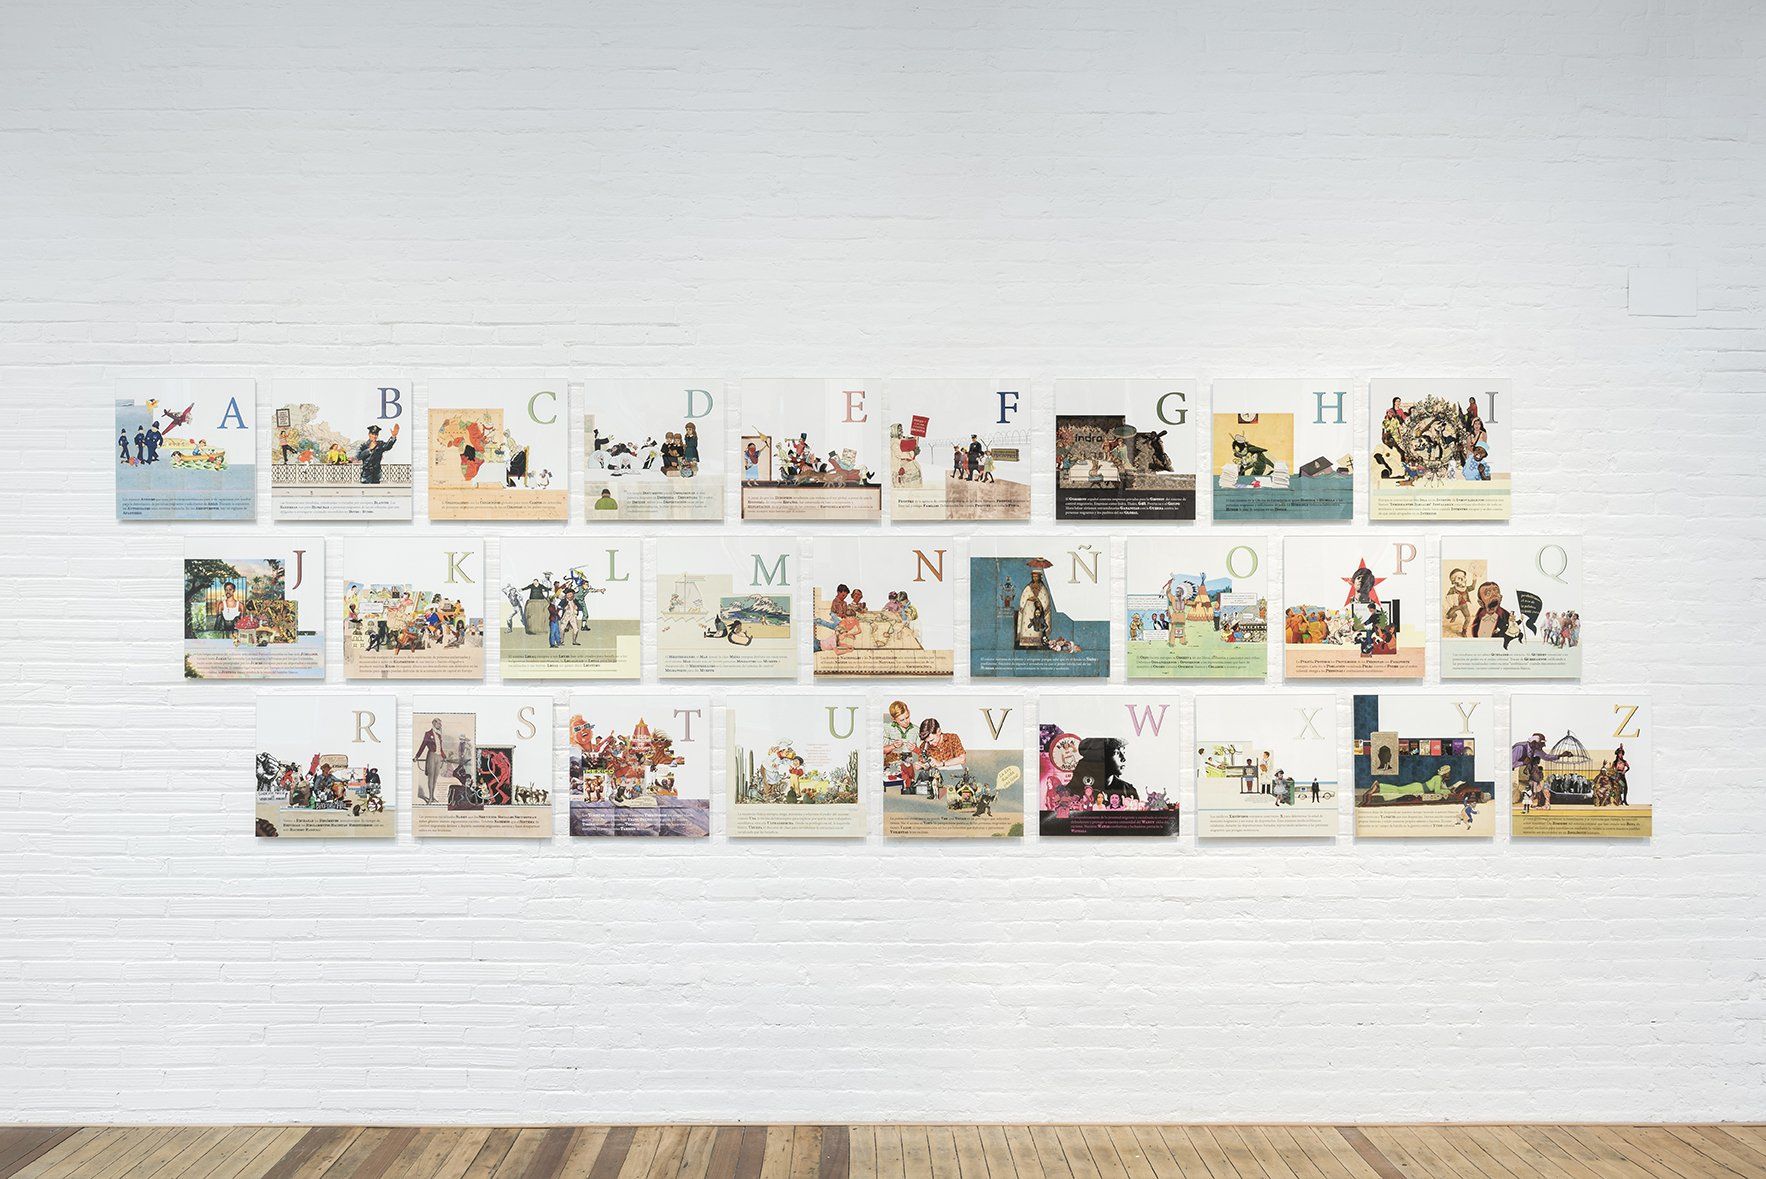 Pictured is a a wall installation displaying each page of the children’s book, 'The ABCs of Racist Europe,' creating an anti-racist narrative in alphabetical order. The book addresses the connection between the migratory control system, colonialism and coloniality, while reinterpreting diverse words. The publication also narrates various struggles and resistances against racism.